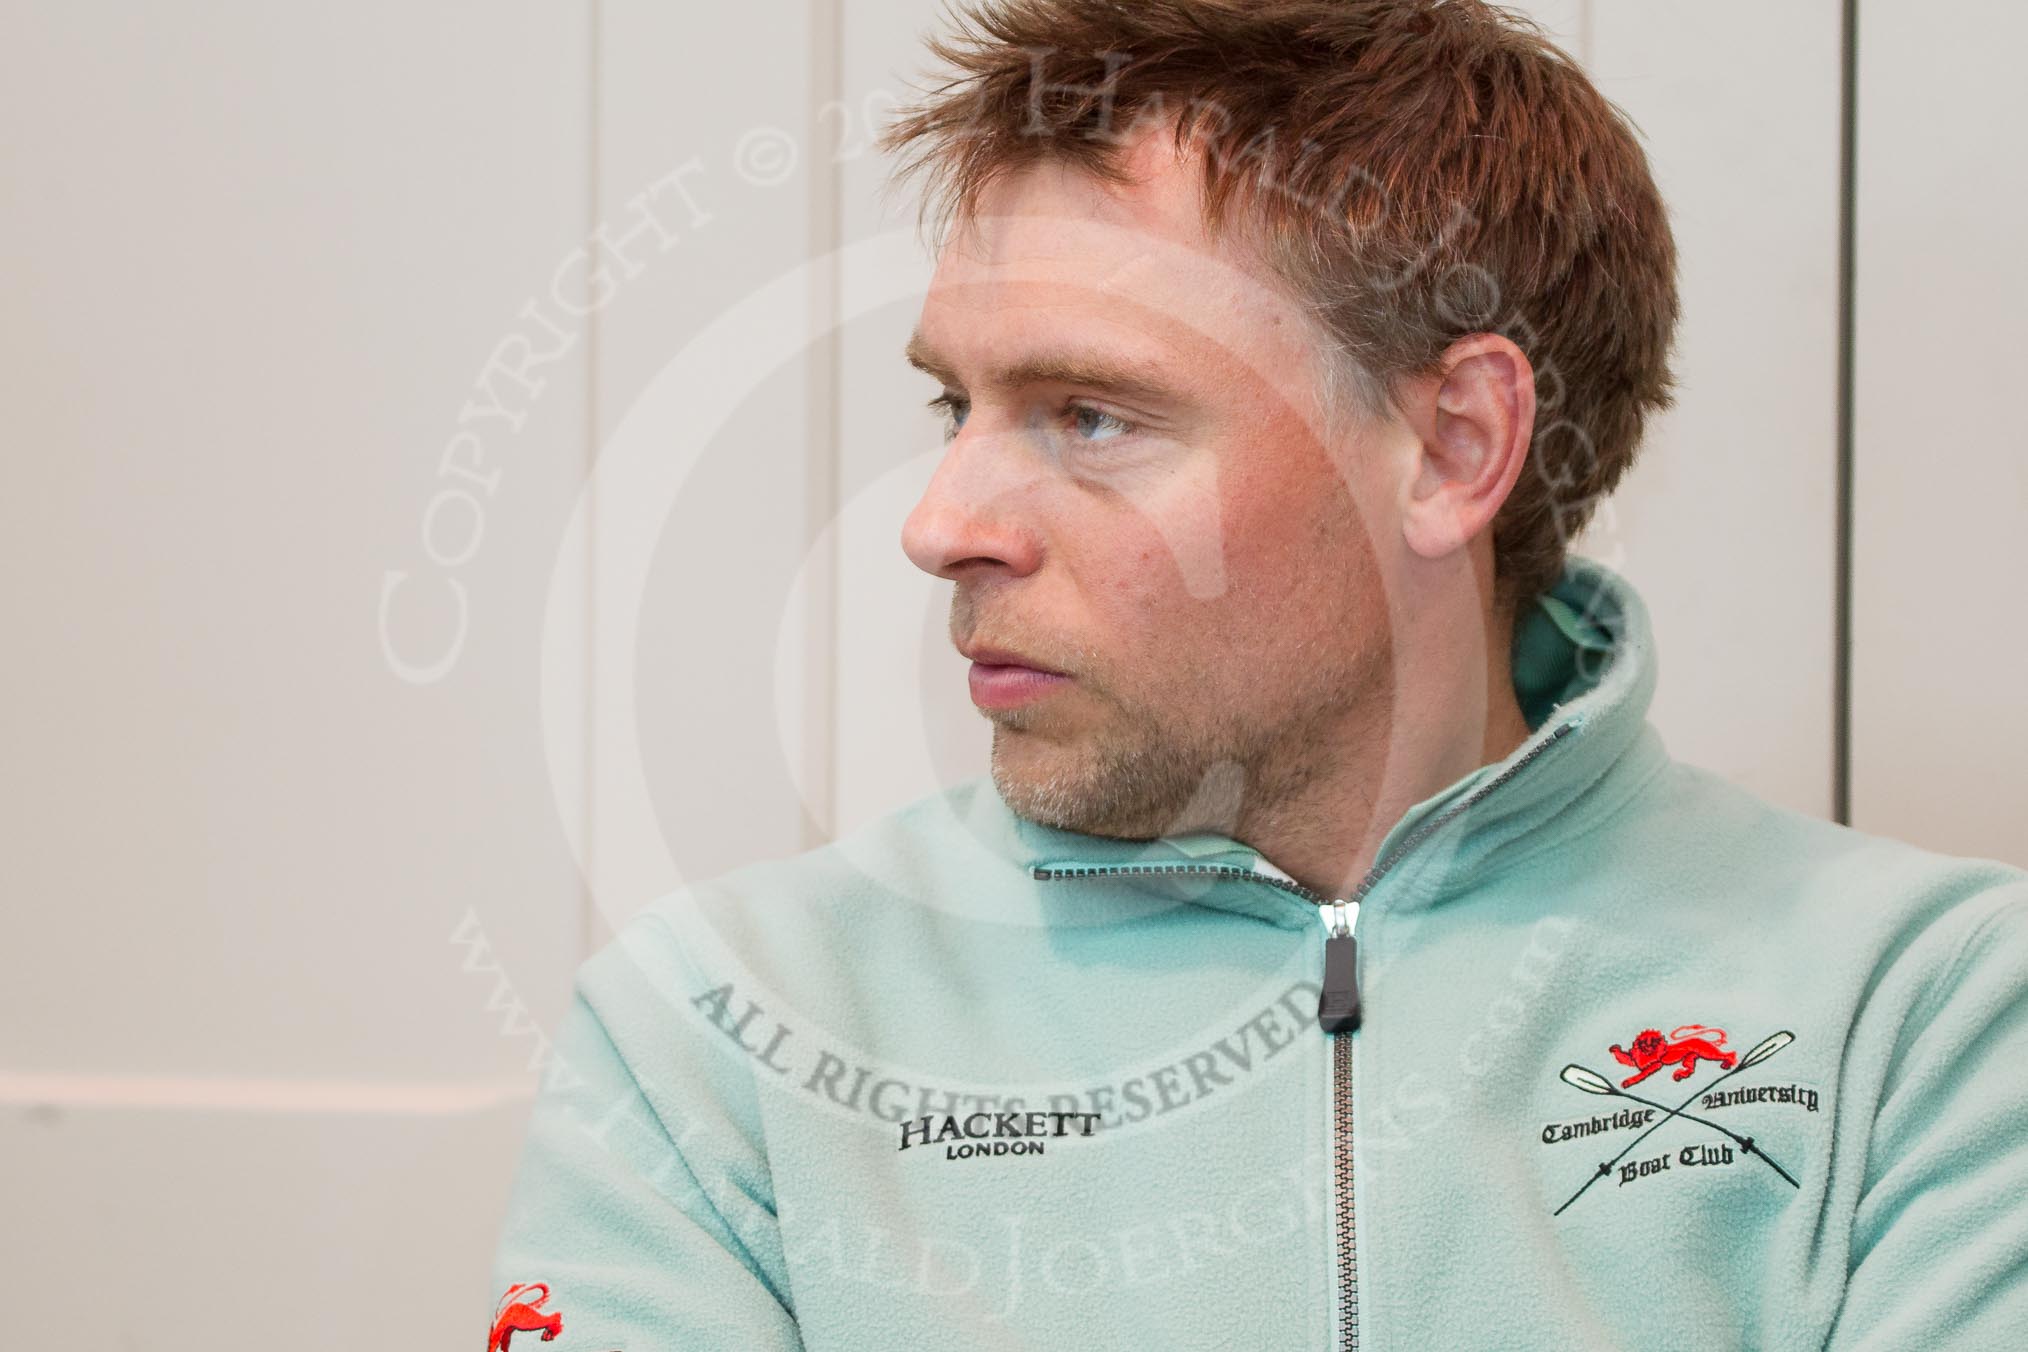 Cambridge University Boat Club chief coach Steve Trapmore during the press conference on April 5, 2012, at the BT Press Centre, two days before the 2012 Boat Race.